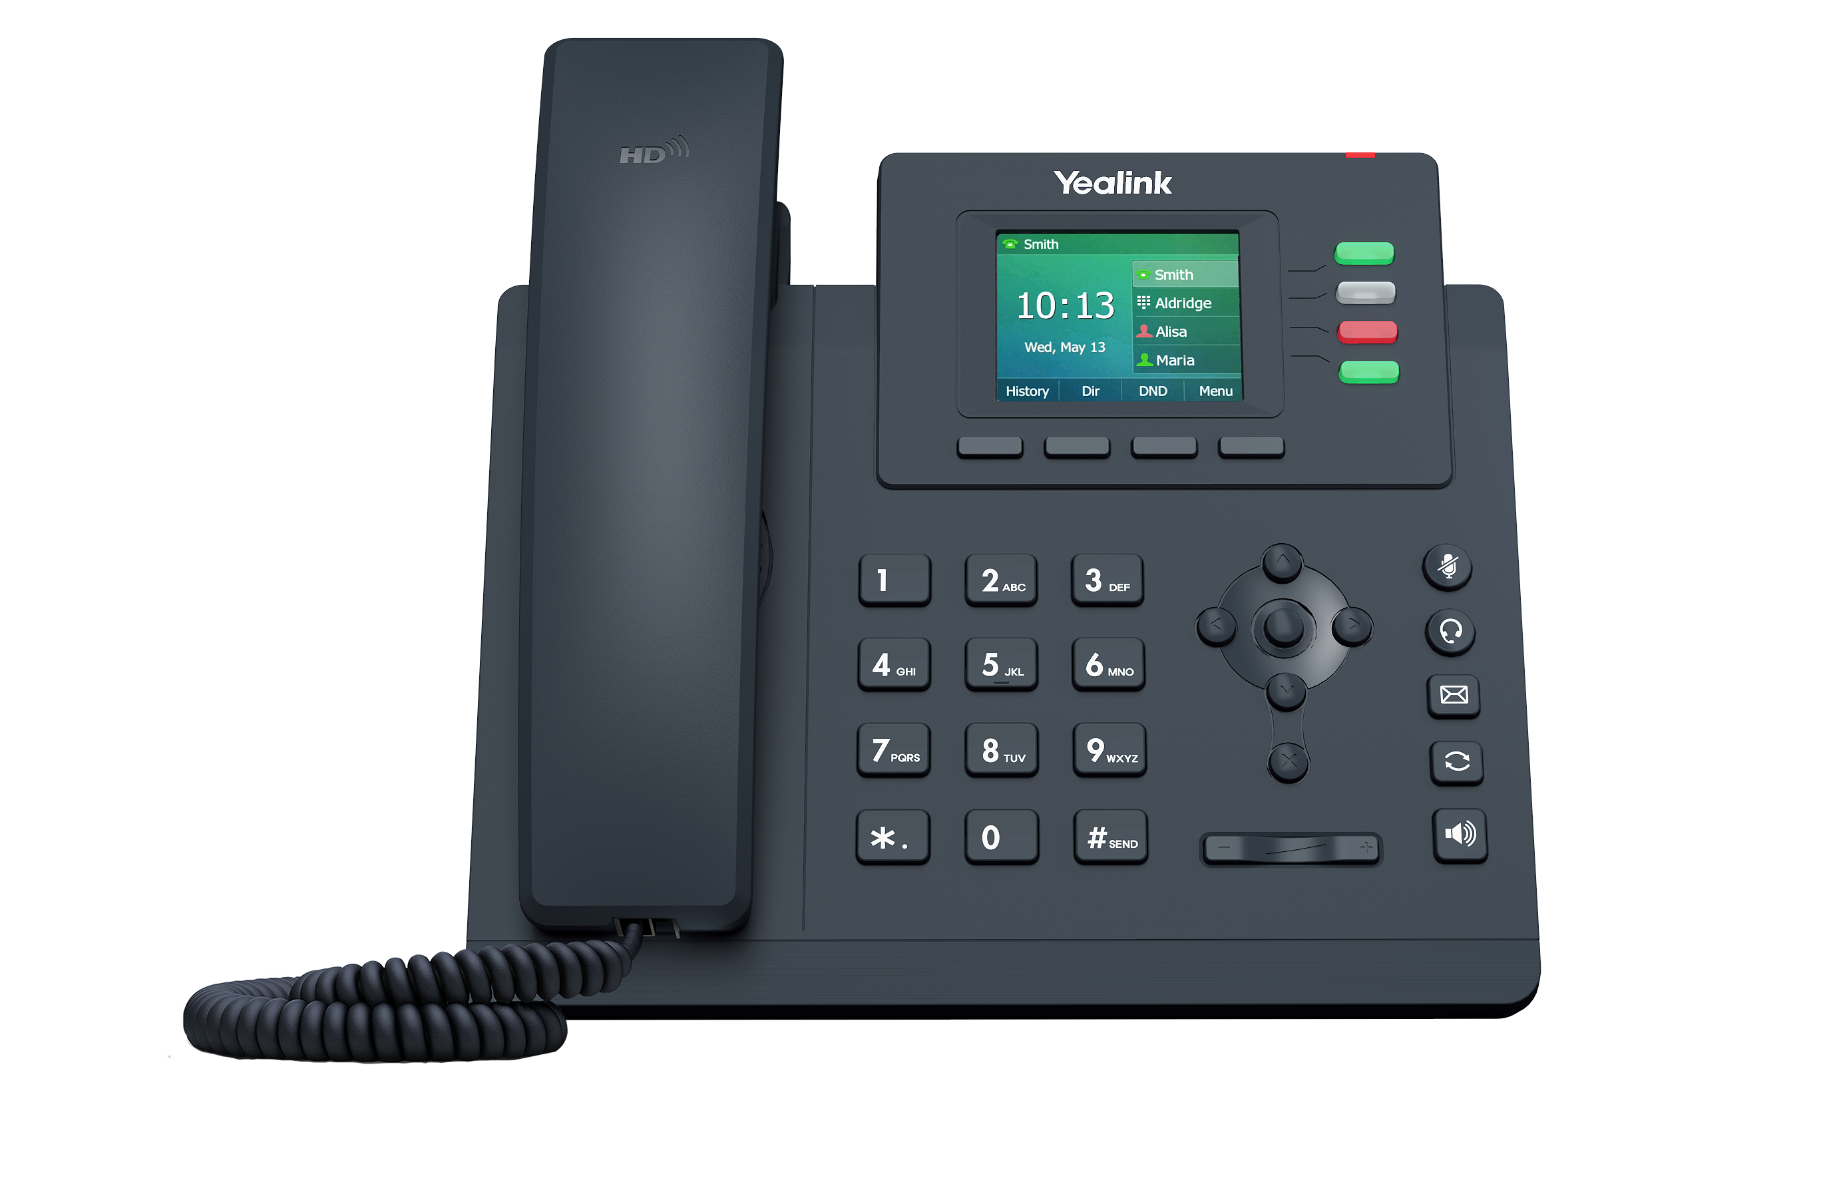 Can you provide the model number for the Yealink T33G Entry Level Gigabit PoE Color IP Phone?